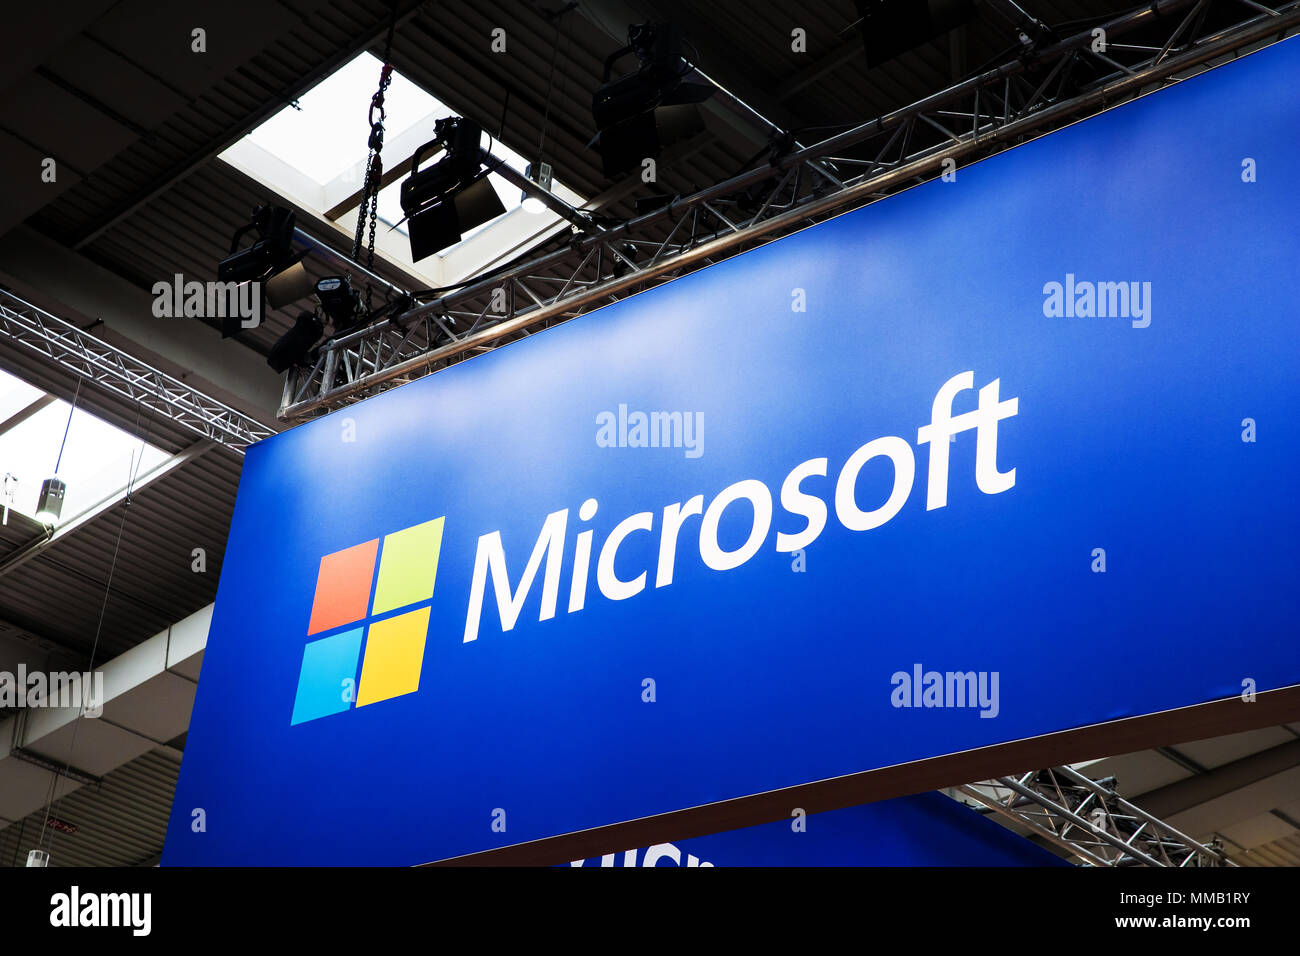 Hannover, Germany - April, 2018: Microsoft booth stand on Messe fair in Hannover, Germany Stock Photo